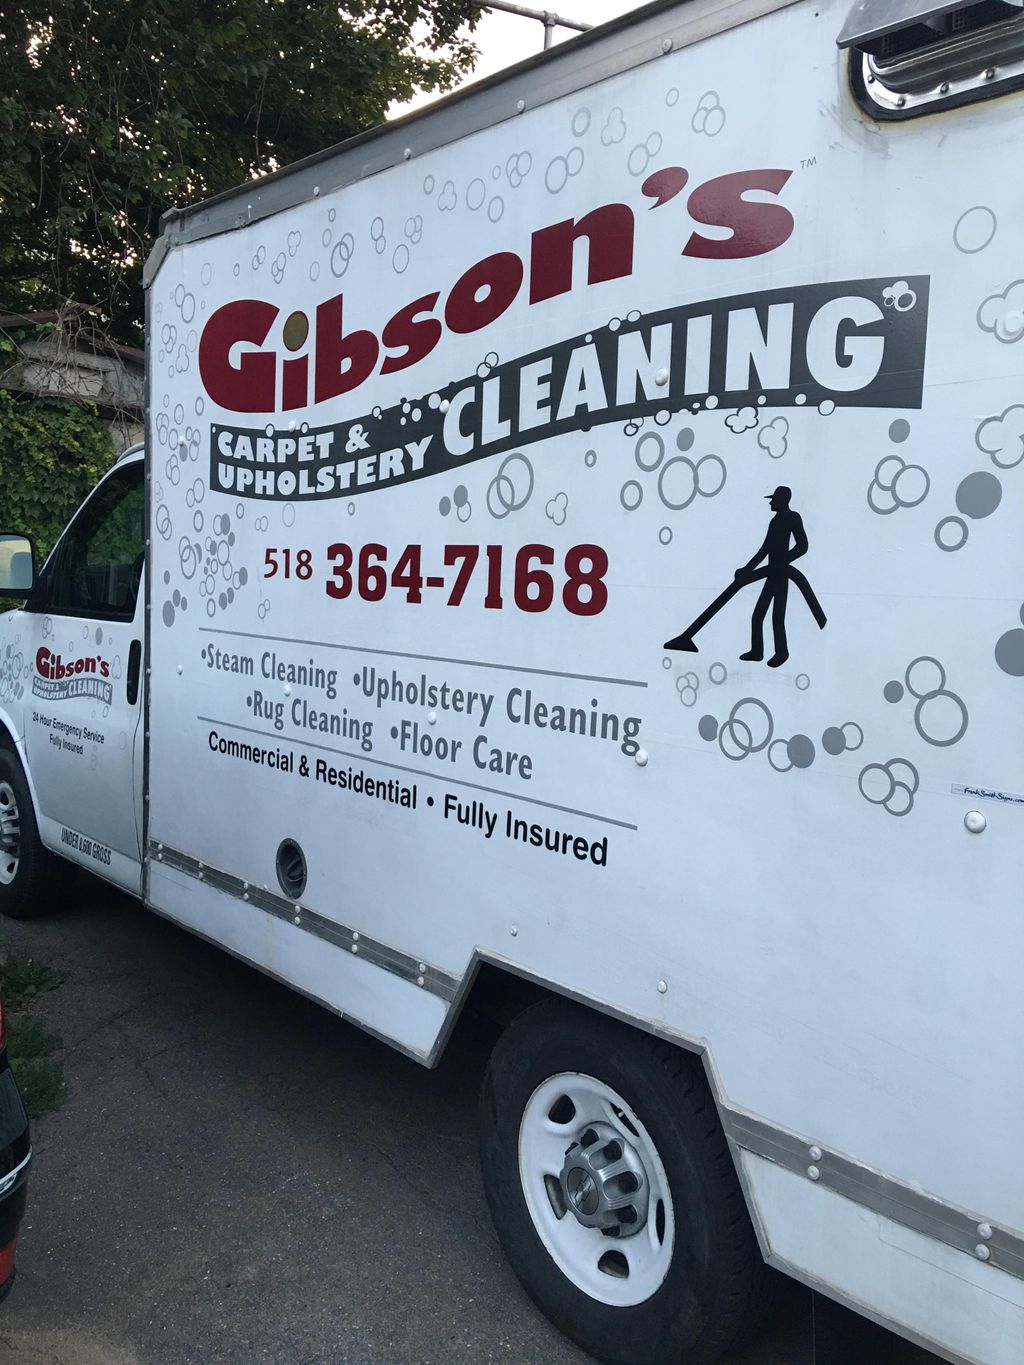 gibsons carpet cleaning service